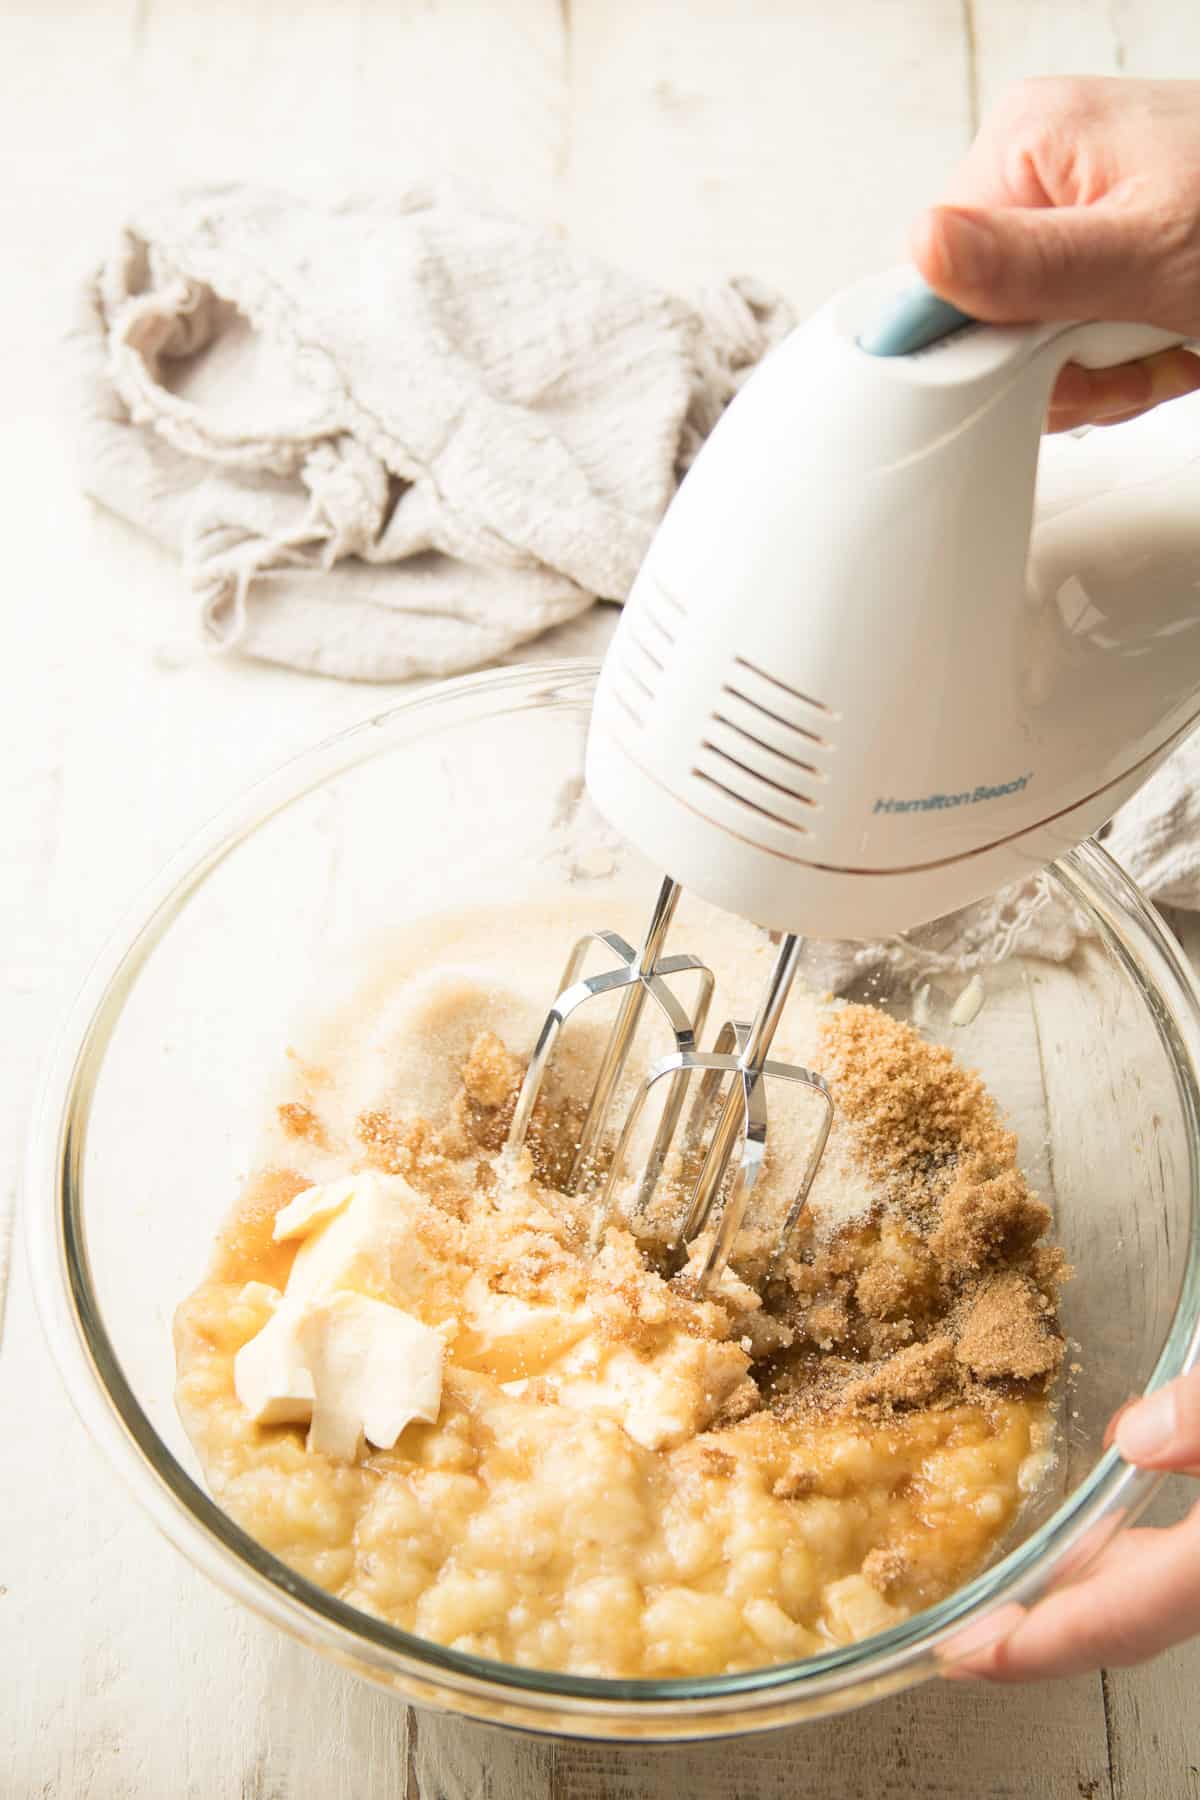 Hand beating bananas, butter, and sugar together with an electric mixer.